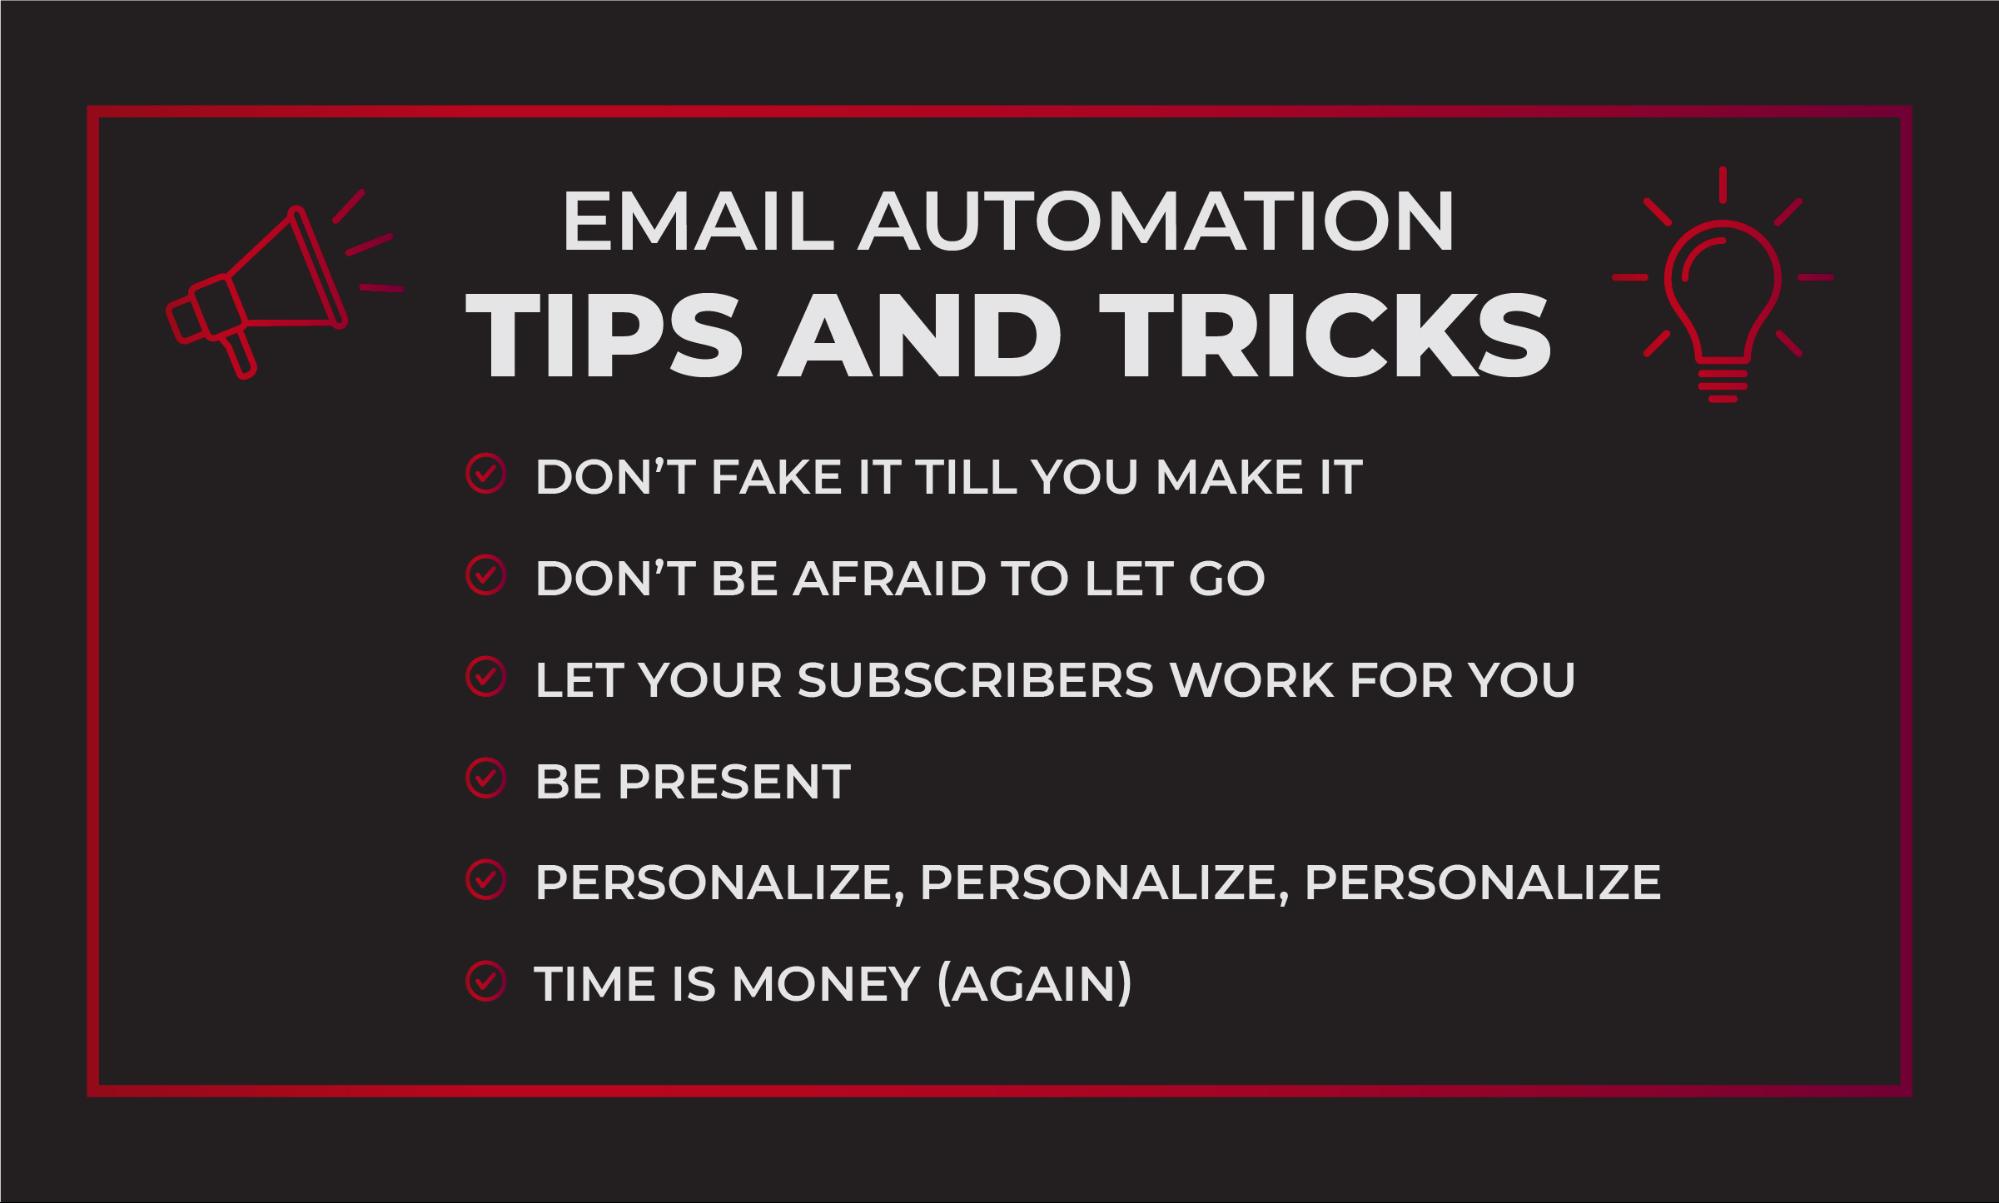 EMAIL AUTOMATION TIPS AND TRICKS